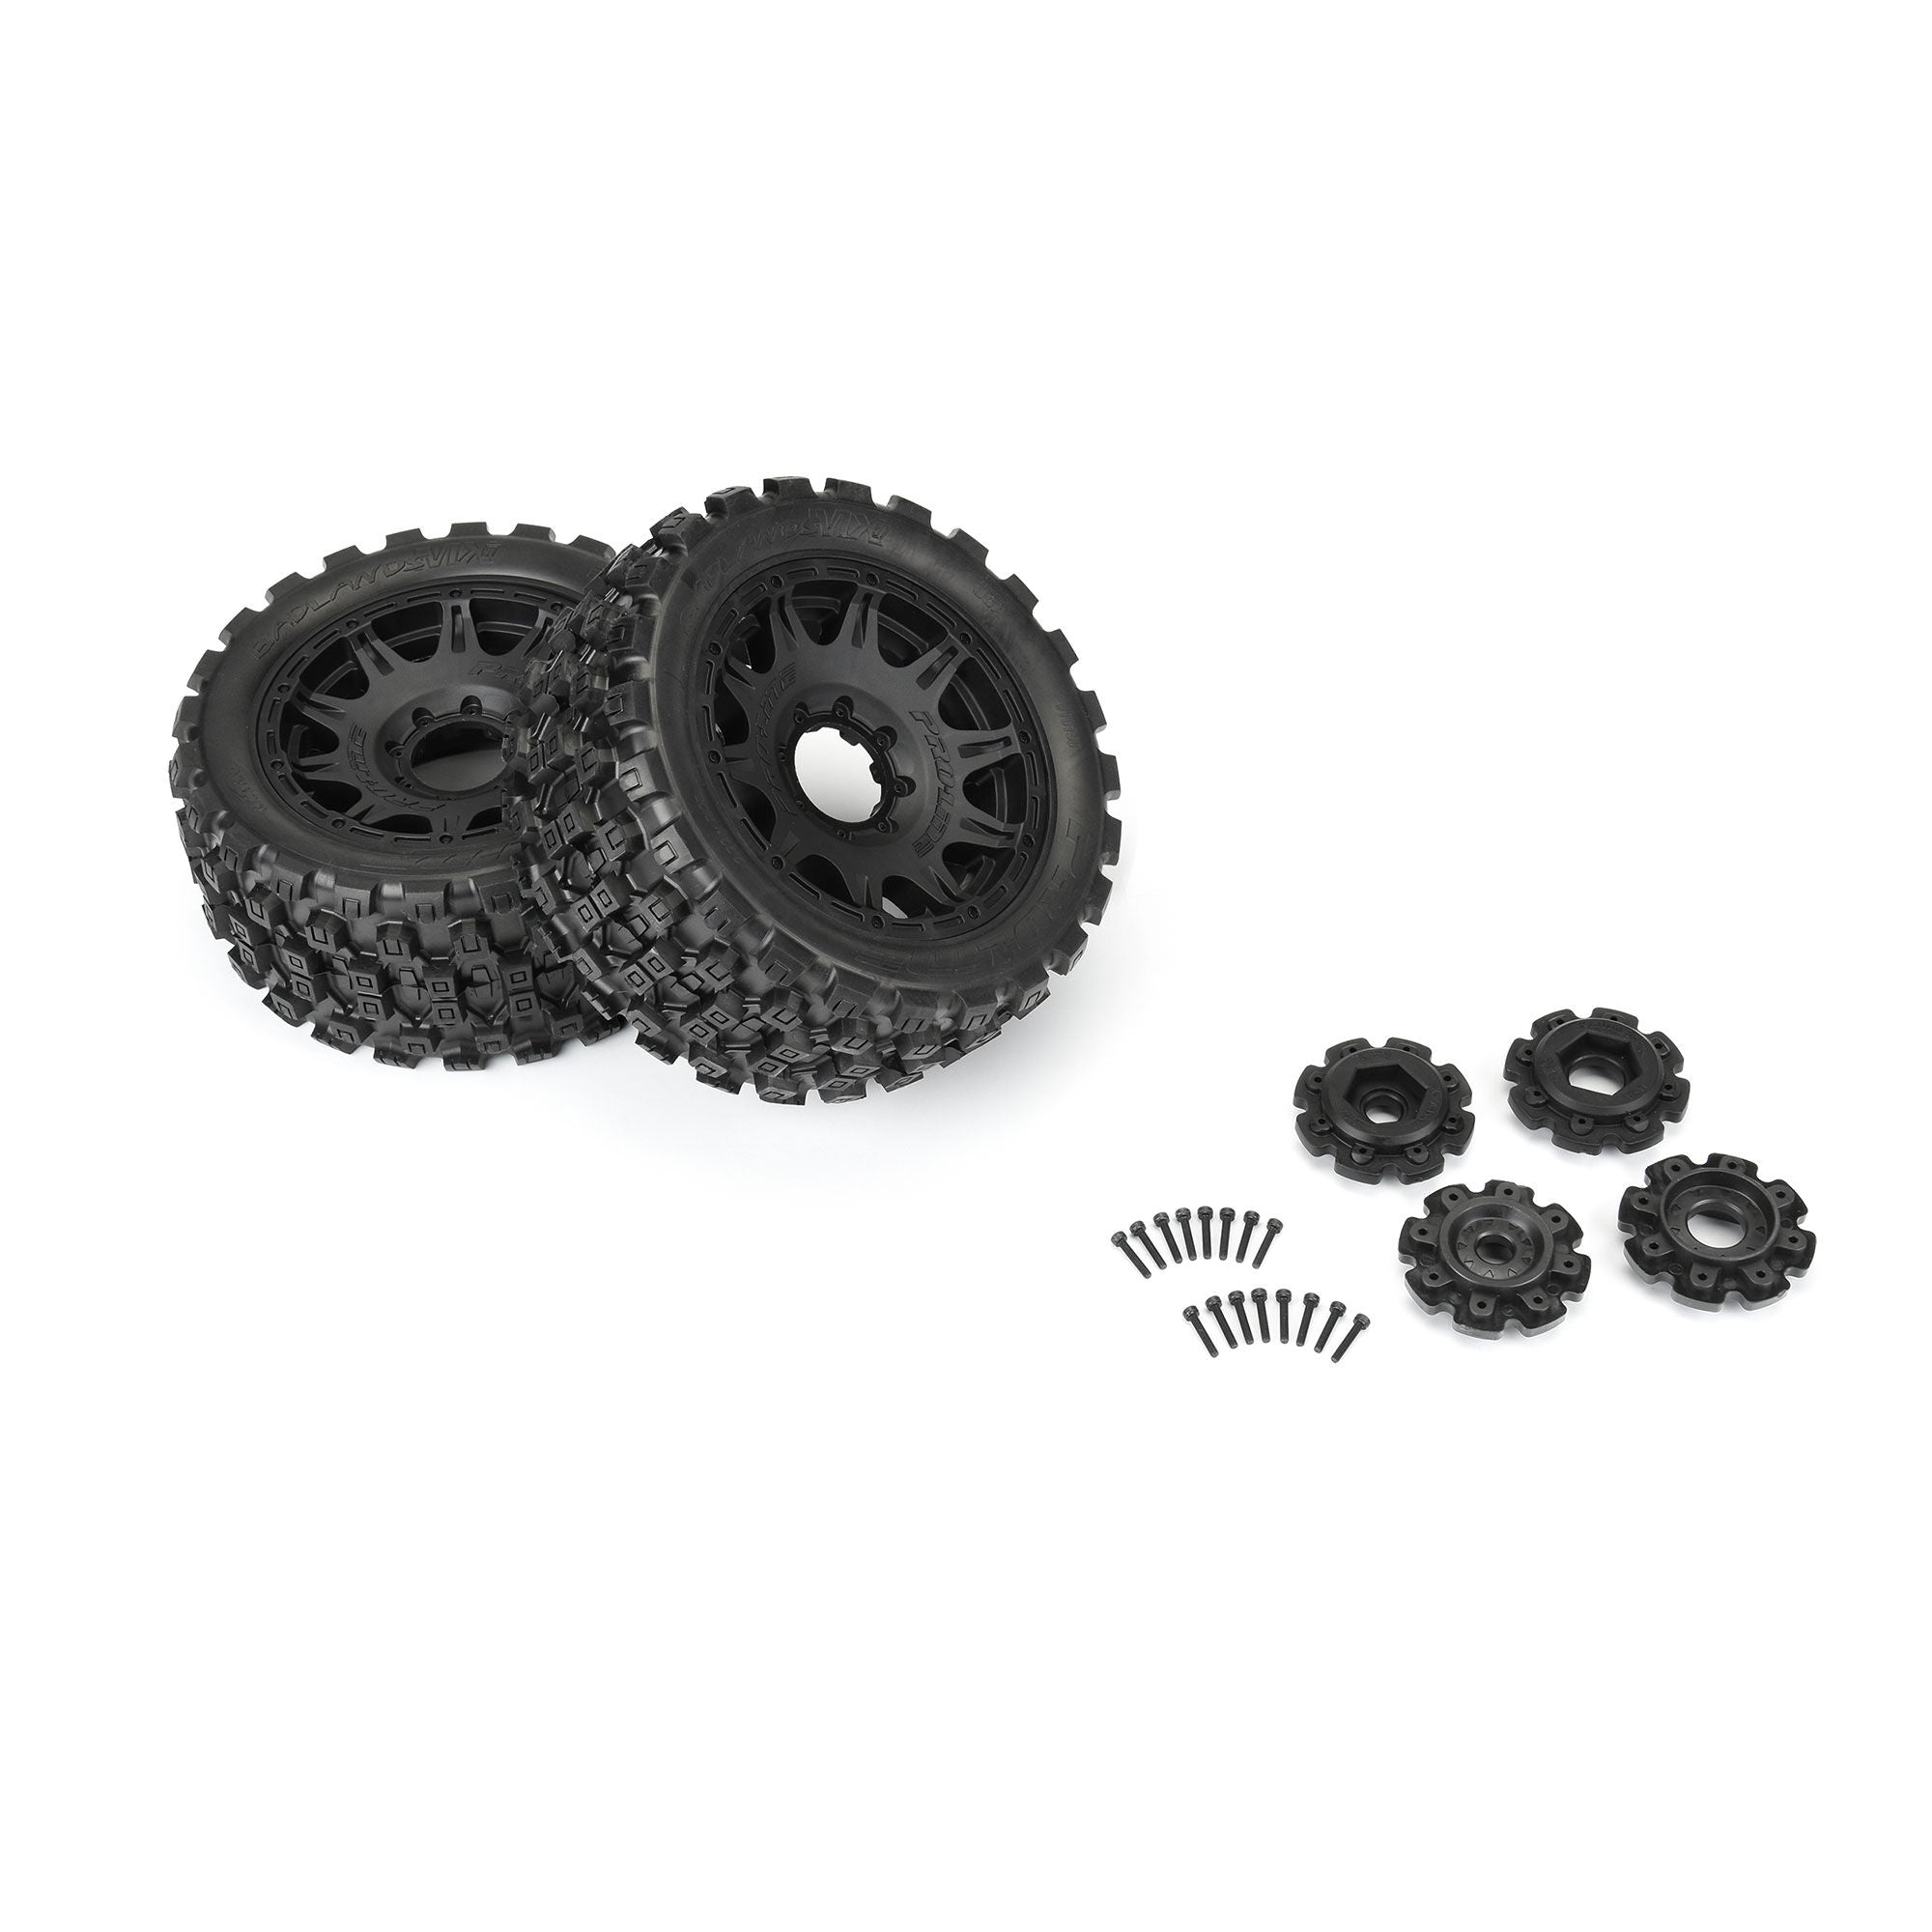 1/6 Badlands MX57 Front/Rear 5.7" Tires Mounted on Raid 8x48